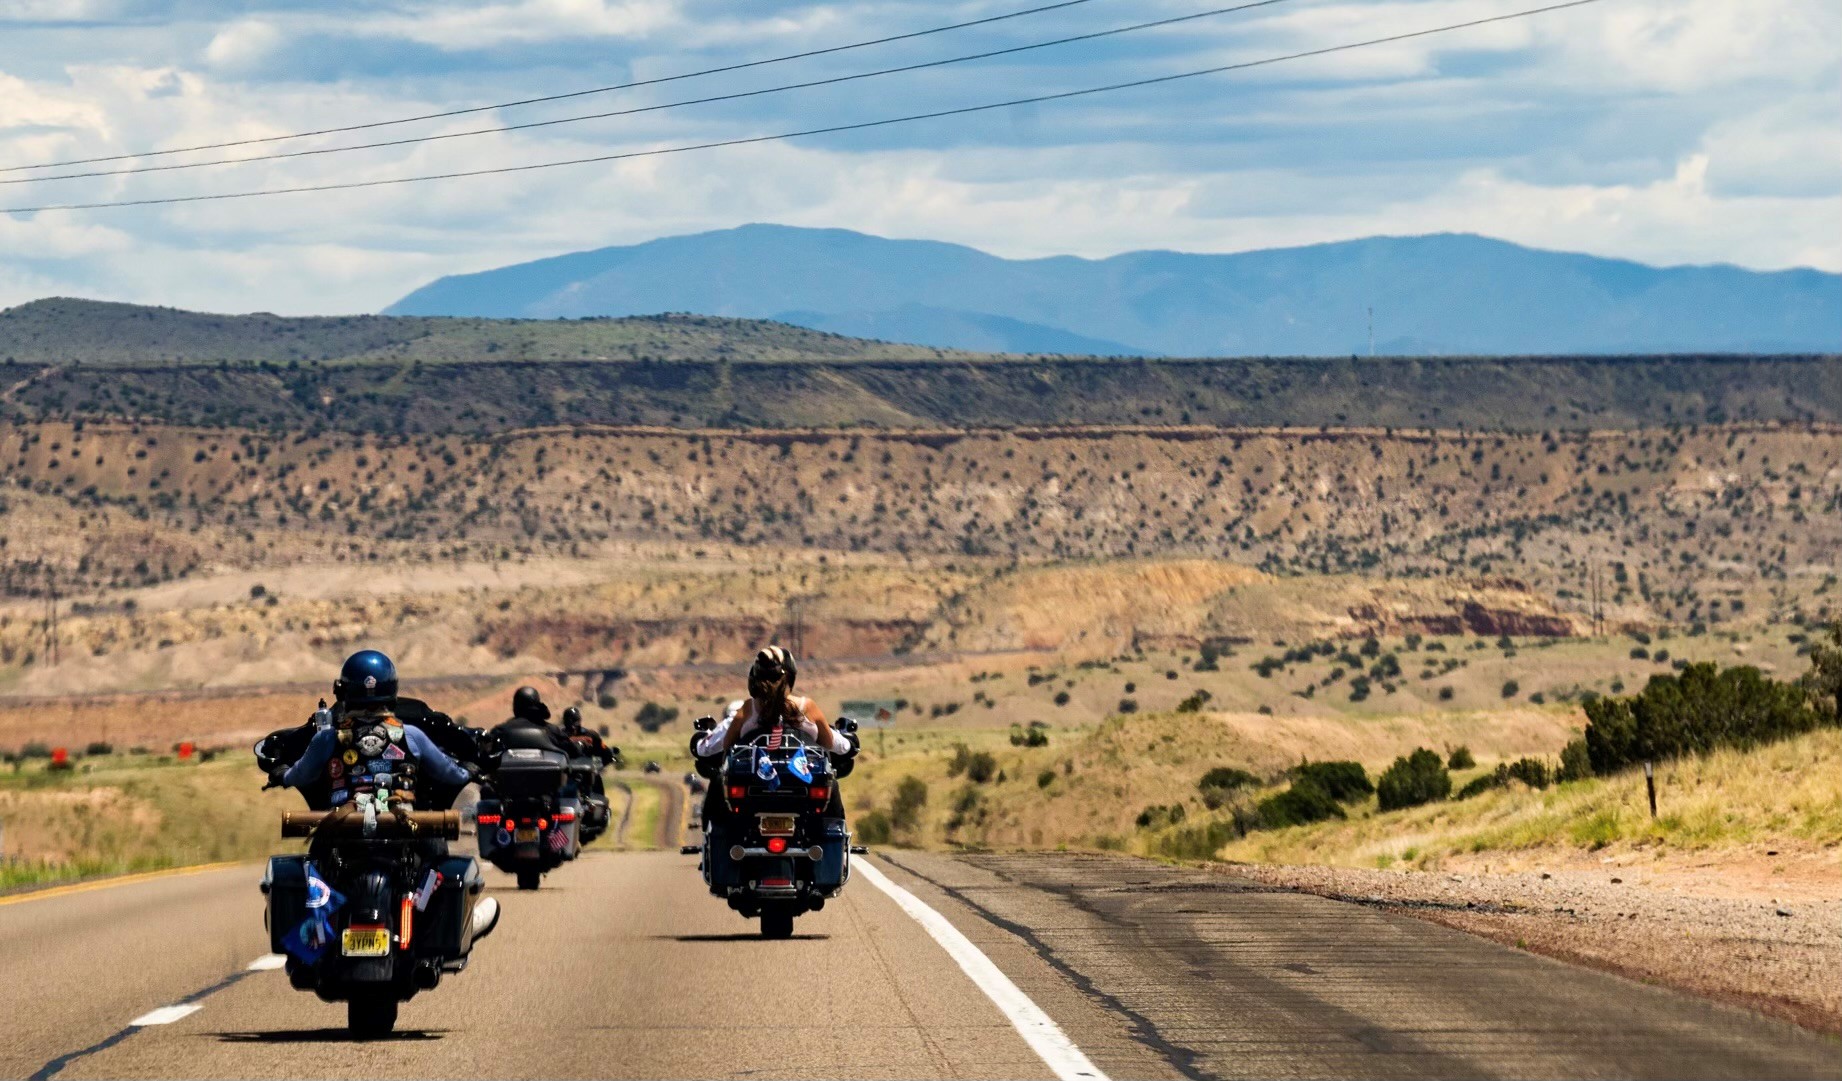 Eight Annual Riding for Warriors 15-Day Motorcycle Ride